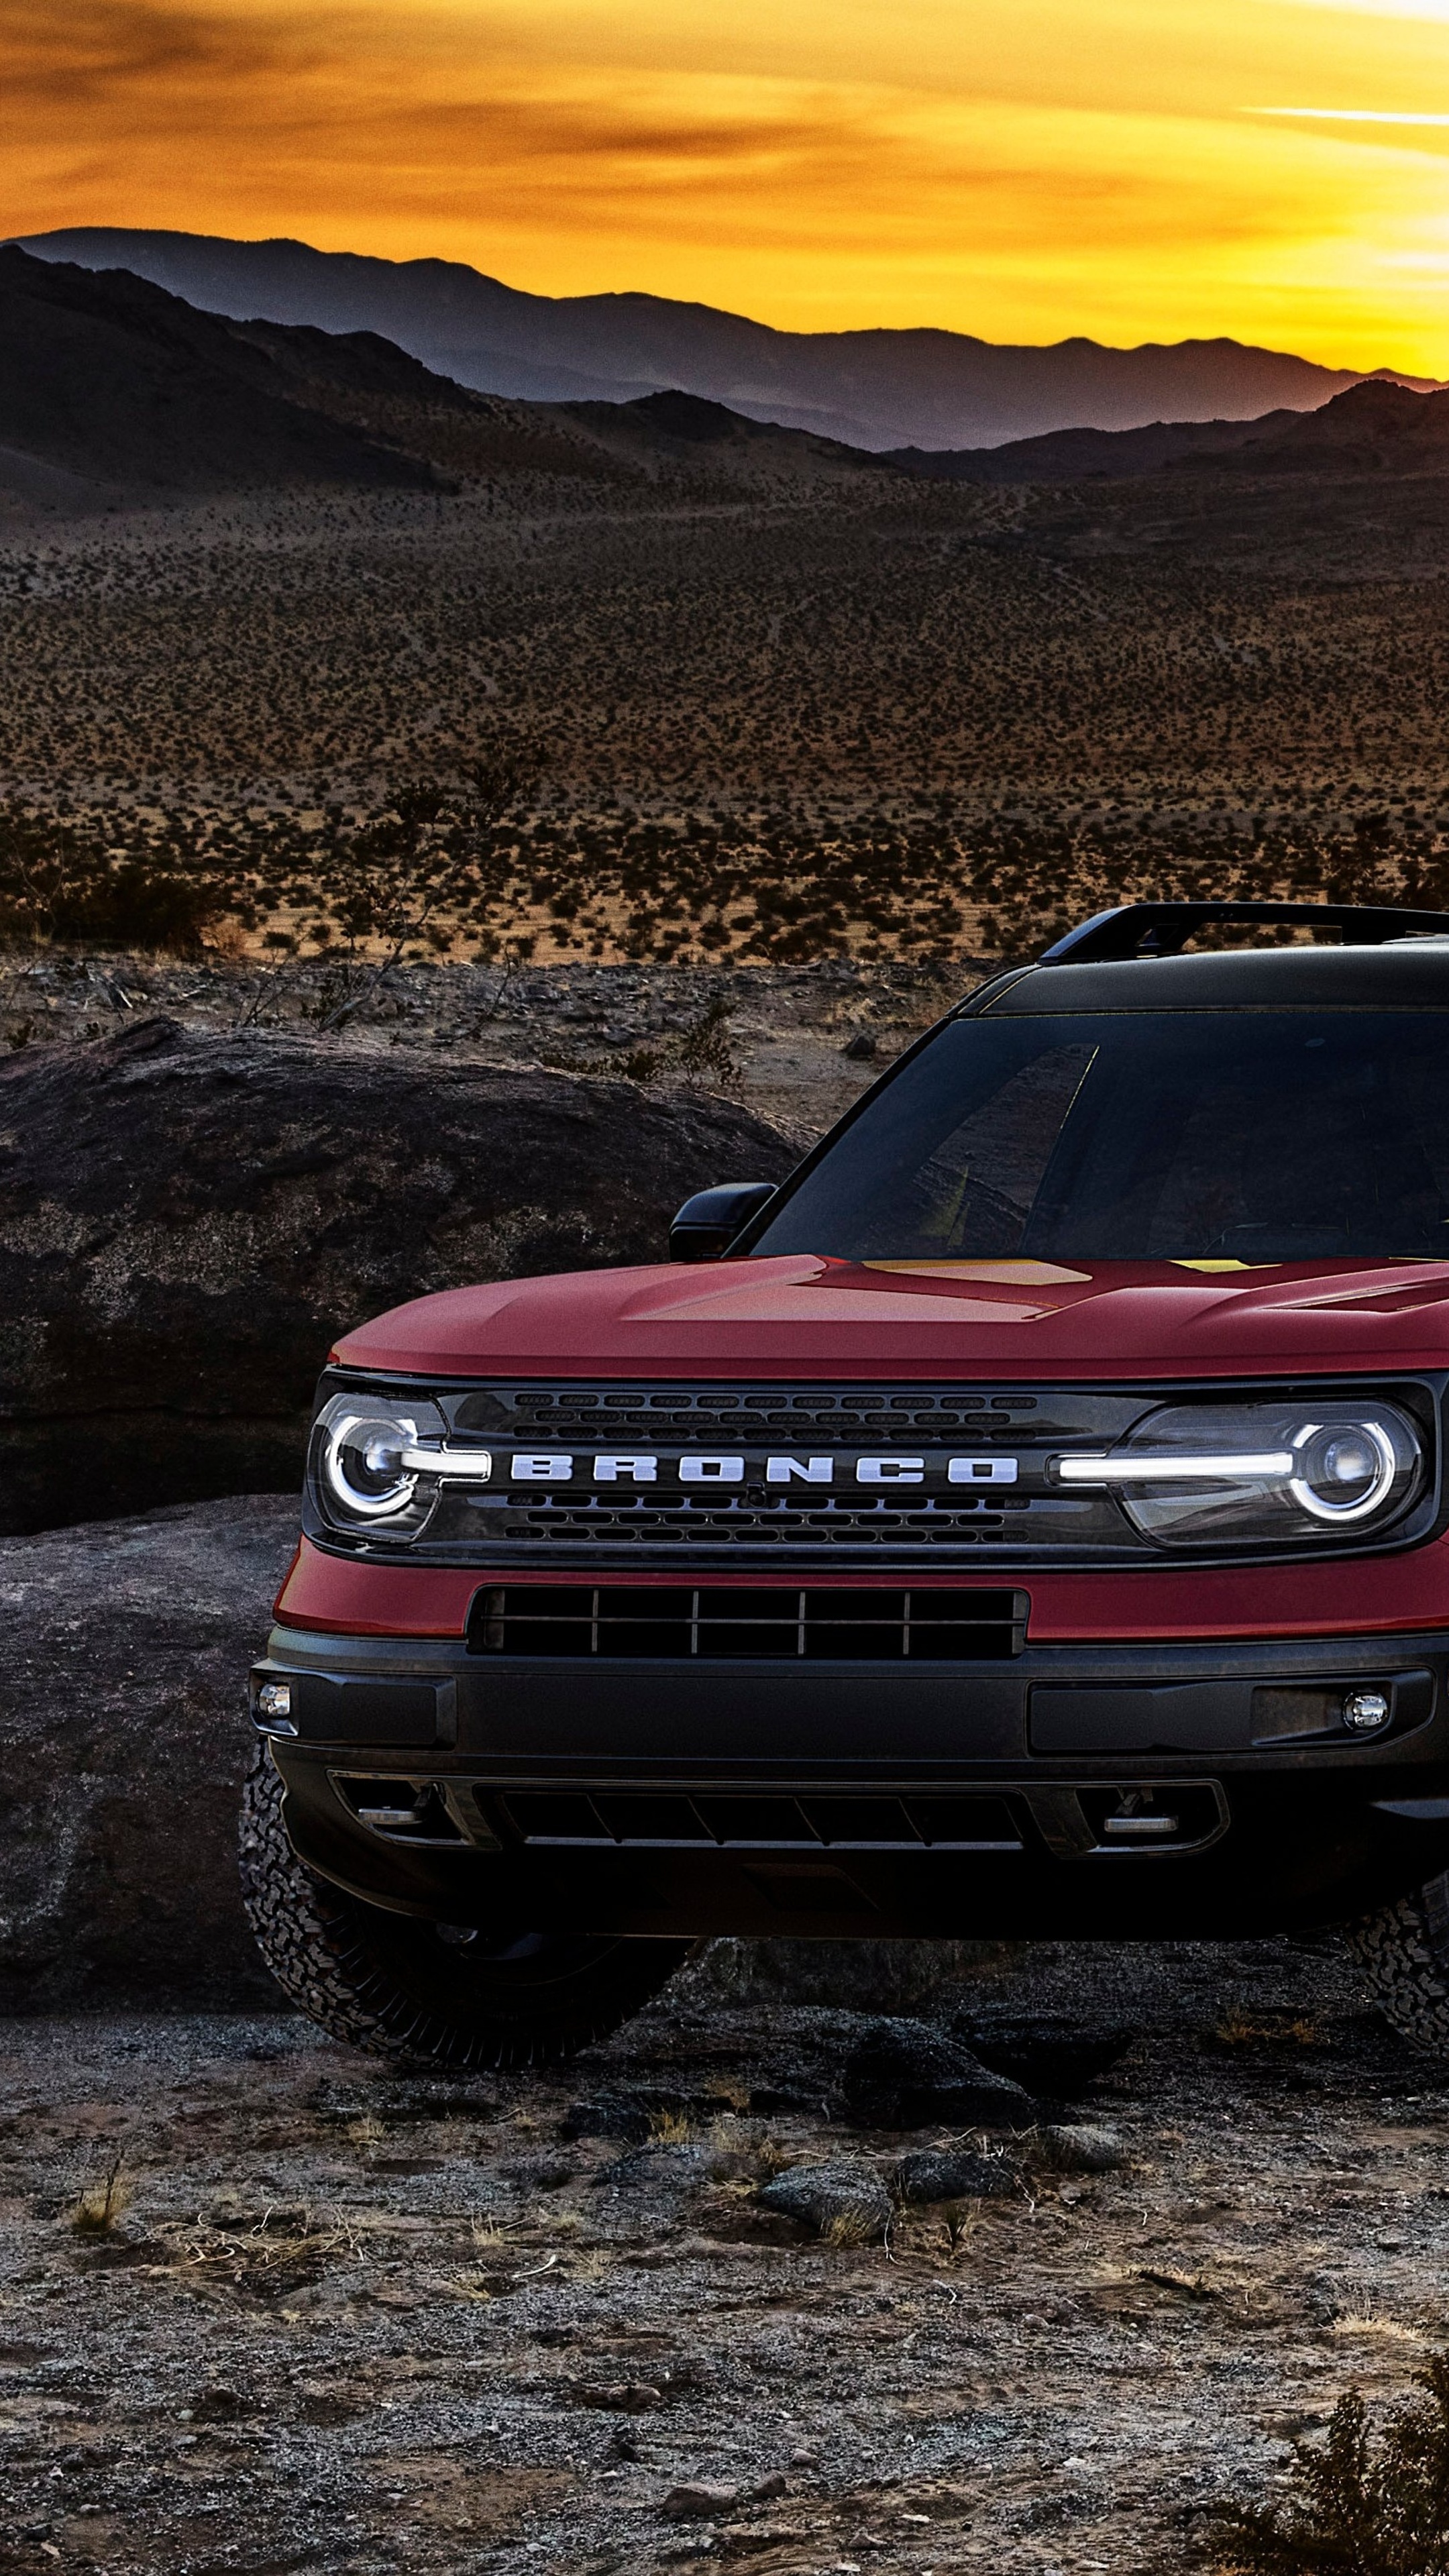 Ford Bronco: Combination Of Road-Going Passenger Cars With Features From Off-Road Vehicles, Model Of 2020. 2160x3840 4K Background.